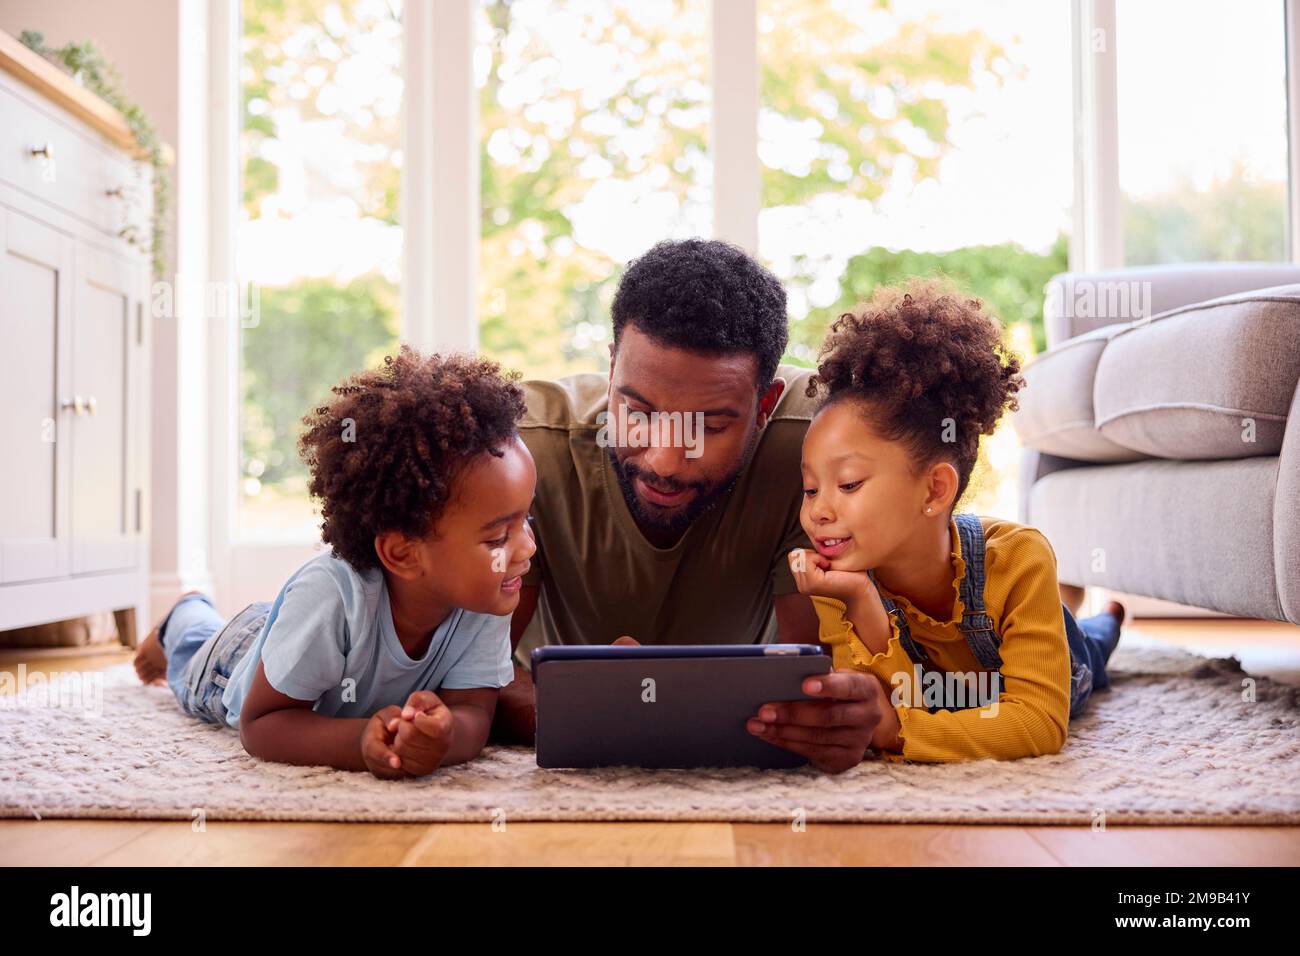 Father At Home Lying On Rug In Lounge With Children Using Digital Tablet Stock Photo